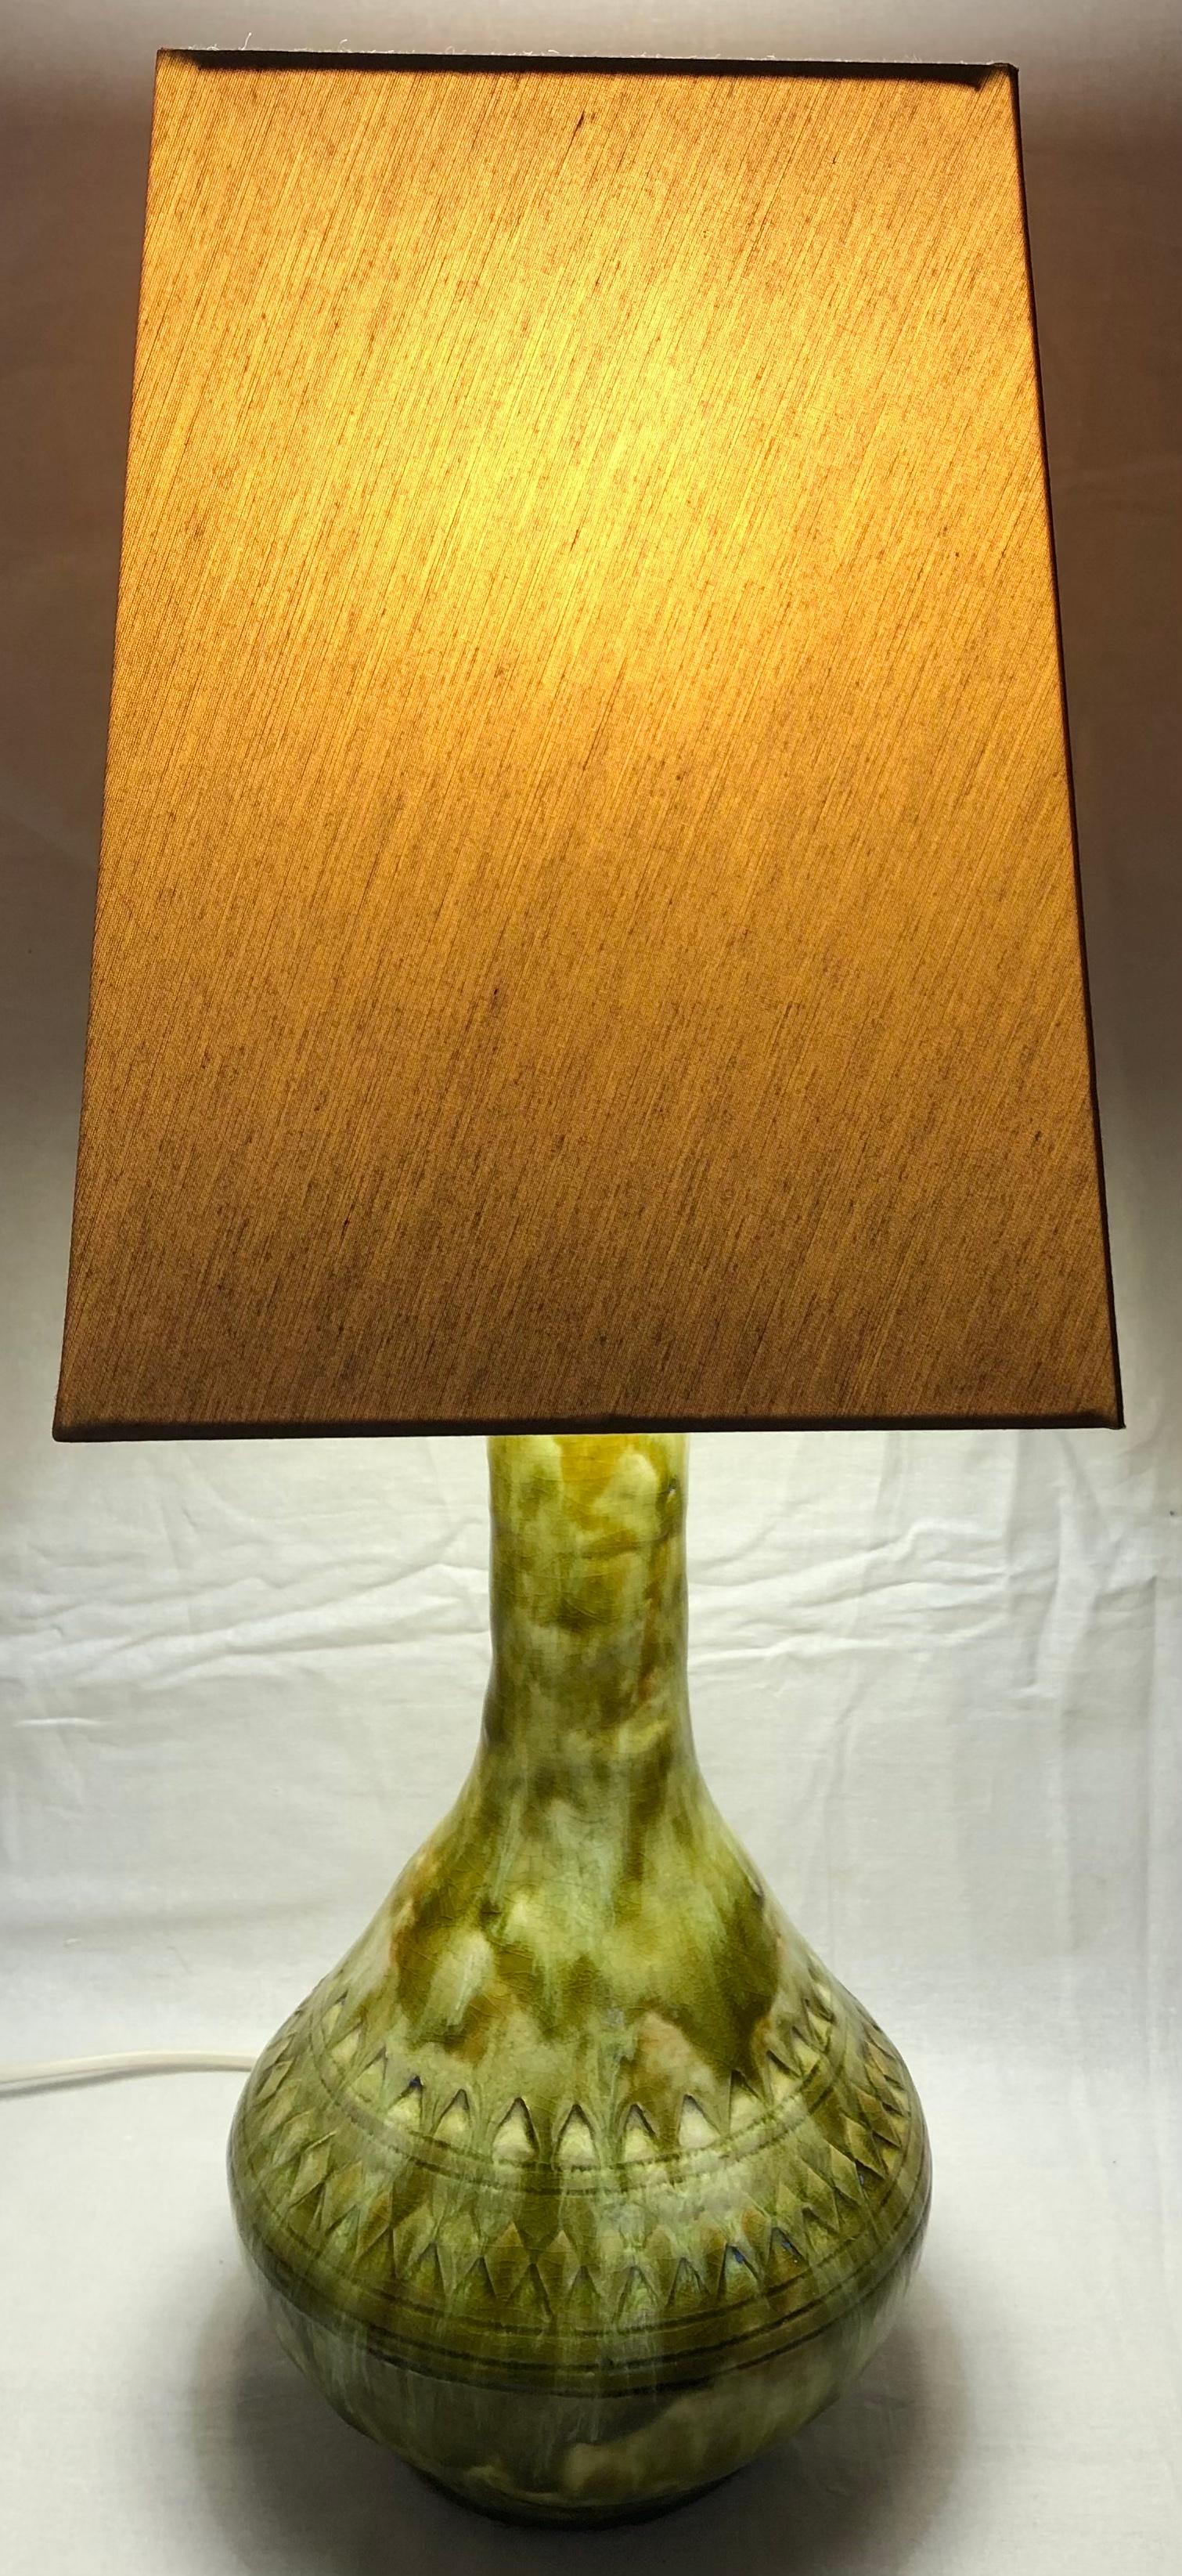 Very decorative table lamp in a stunning array of beige and pale green tones. This Mid-Century Modern ceramic table lamp has notable sculptural work and would look great in any setting.

In perfect vintage condition.
Wired for use in France, sold